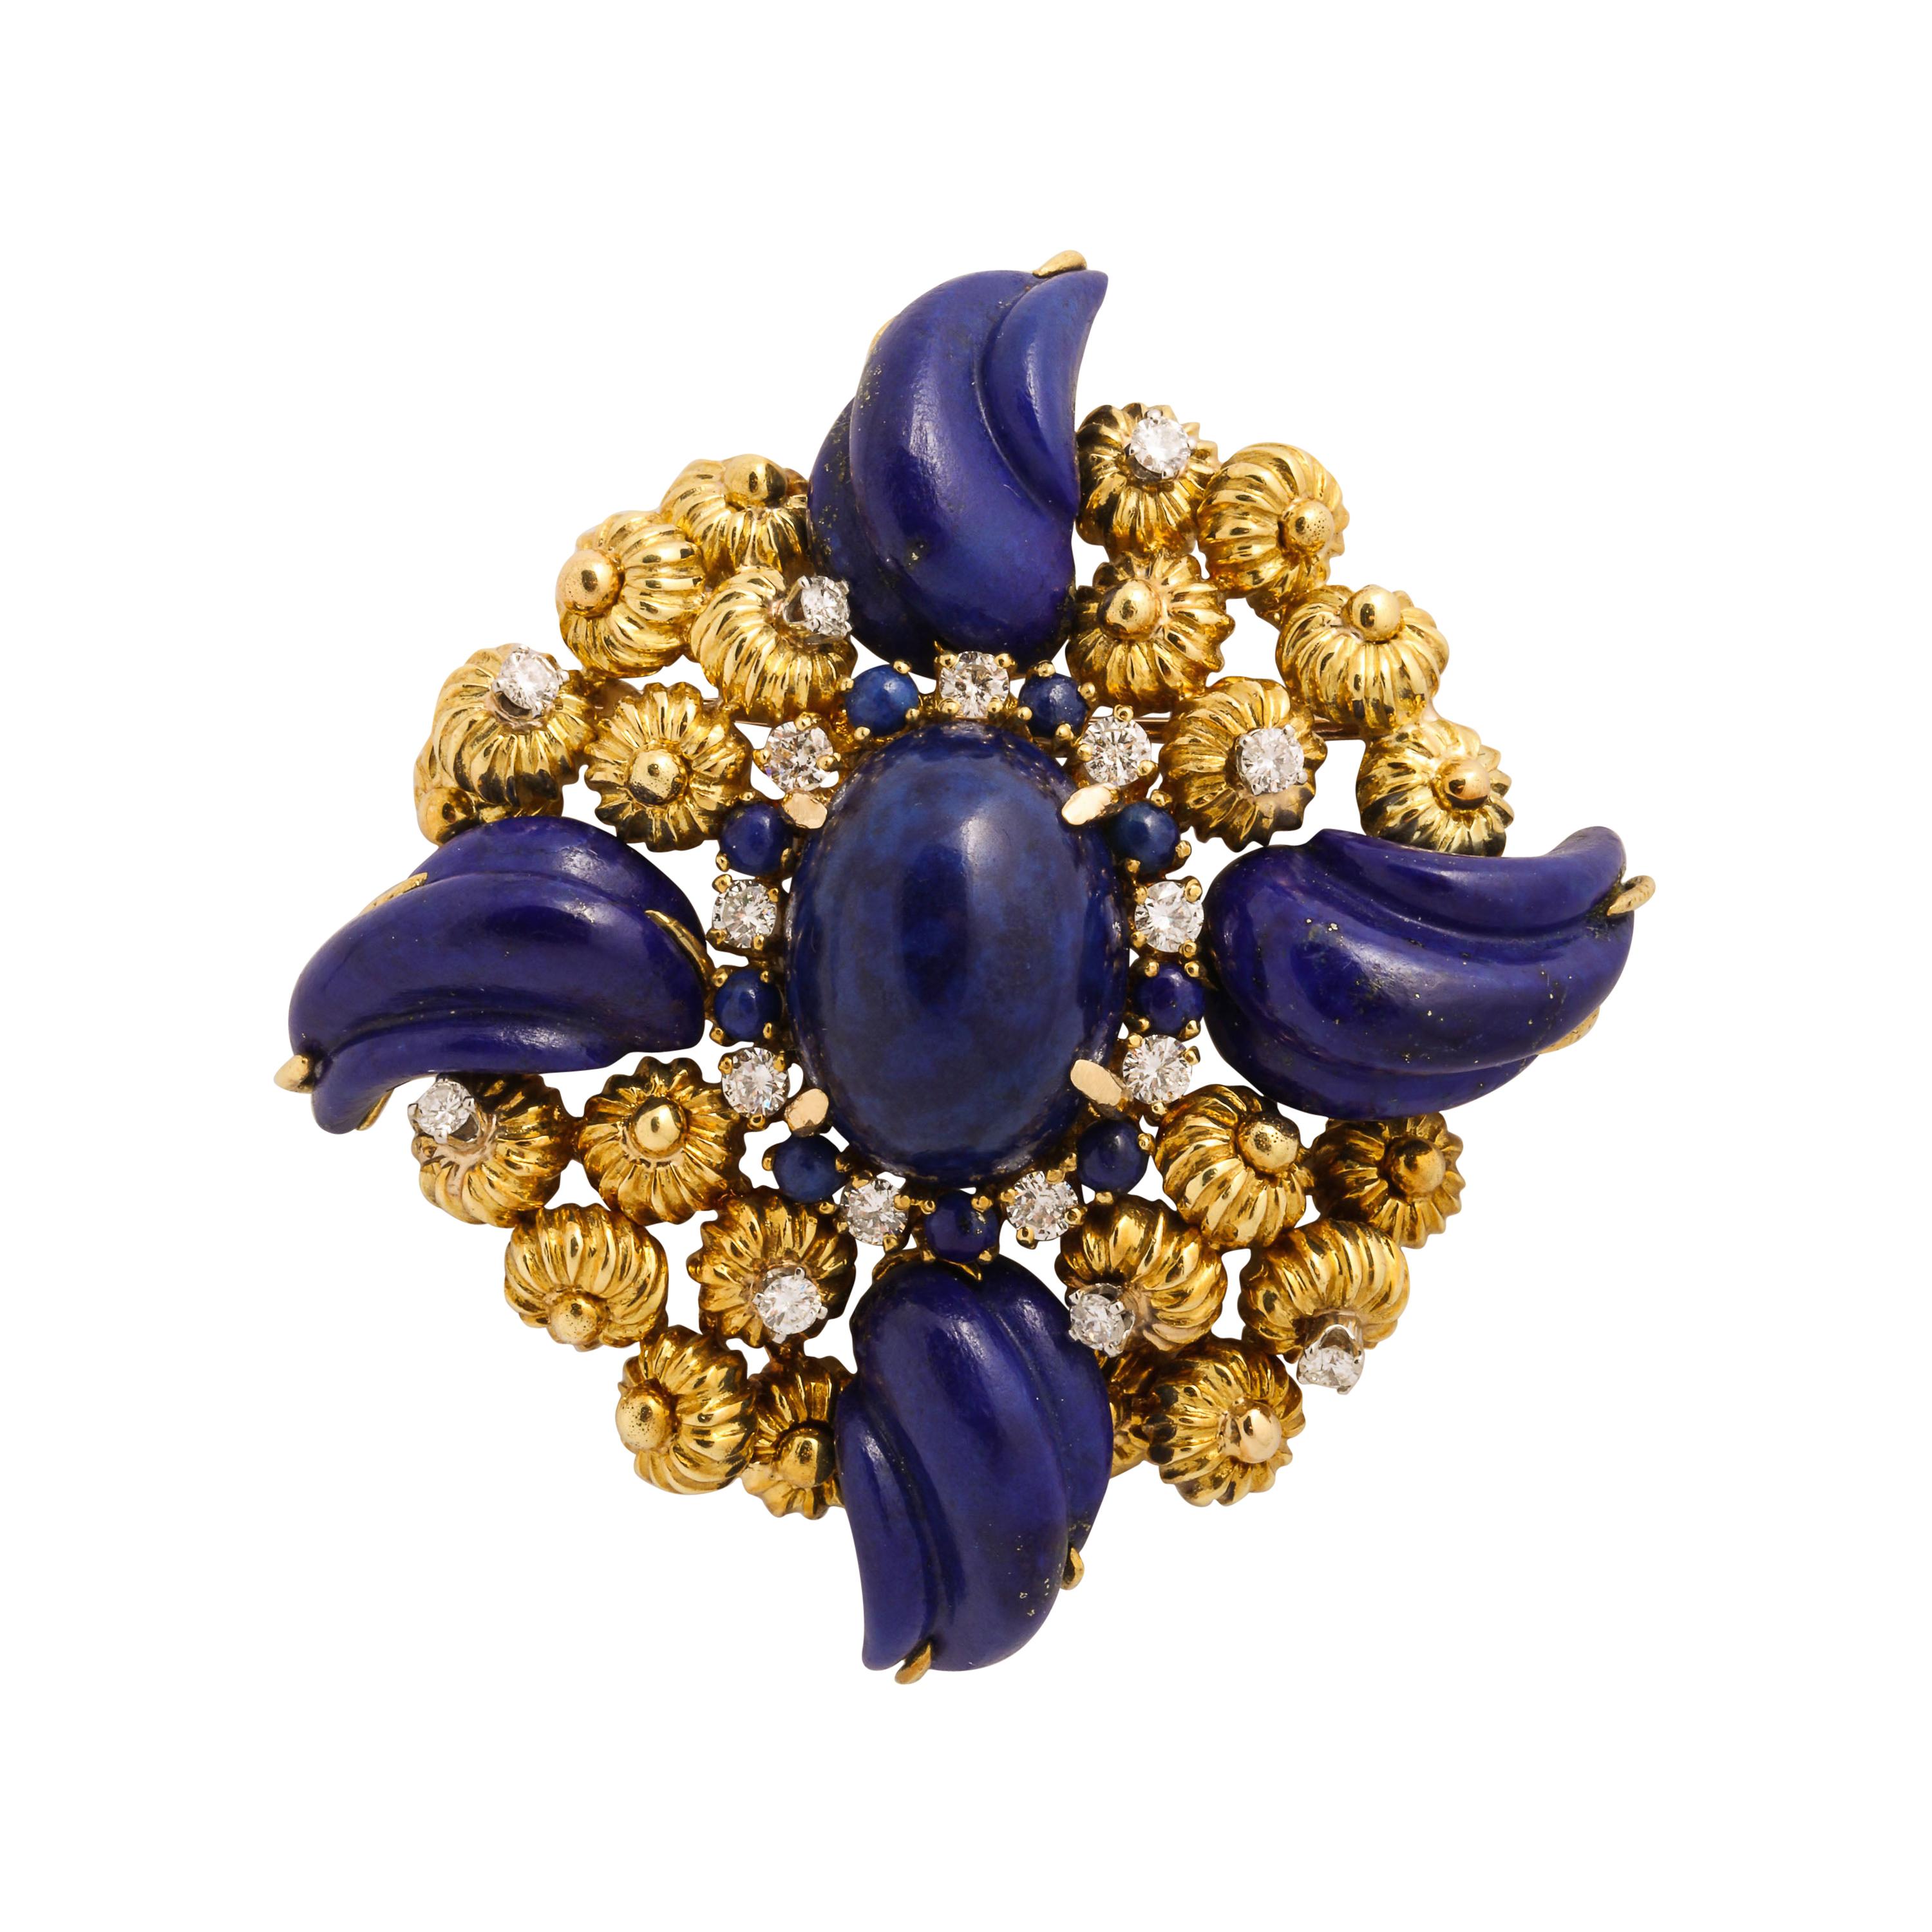 Handmade Gold Pin with Carved Lapis and Diamonds